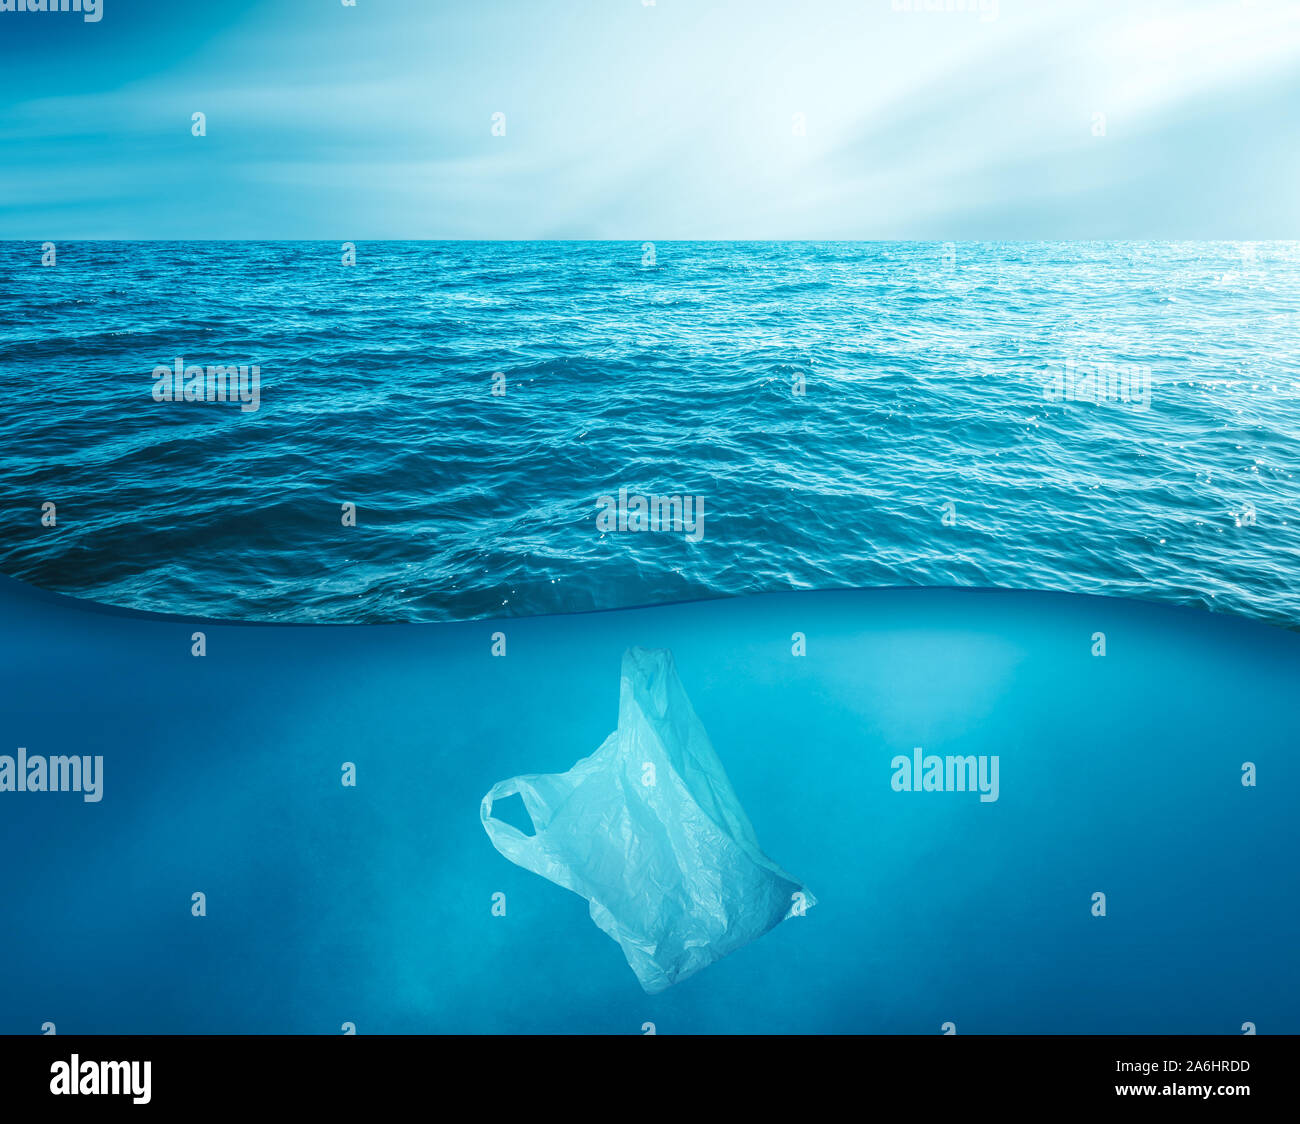 a discarded plastic rubbish bag floats underwater on a presenting a hazard to all marine life. Stock Photo